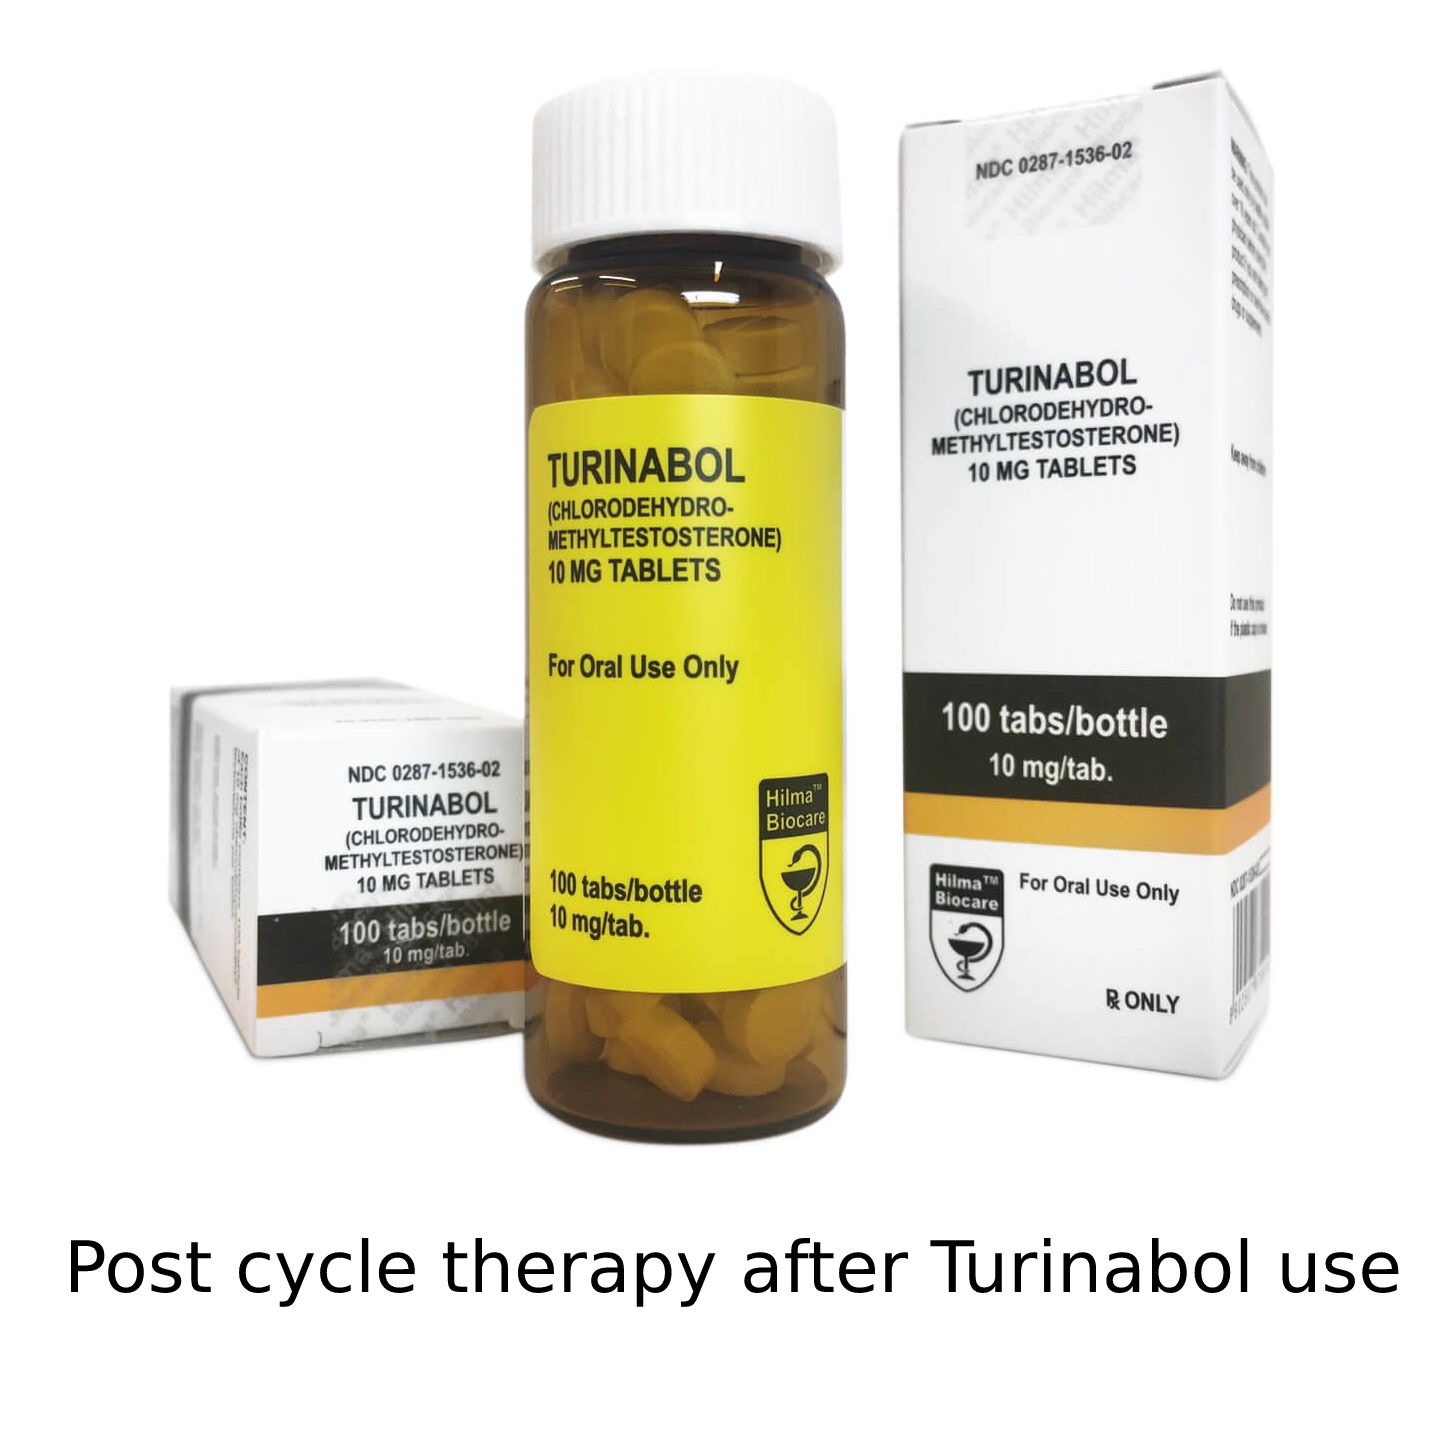 Post cycle therapy after Turinabol use